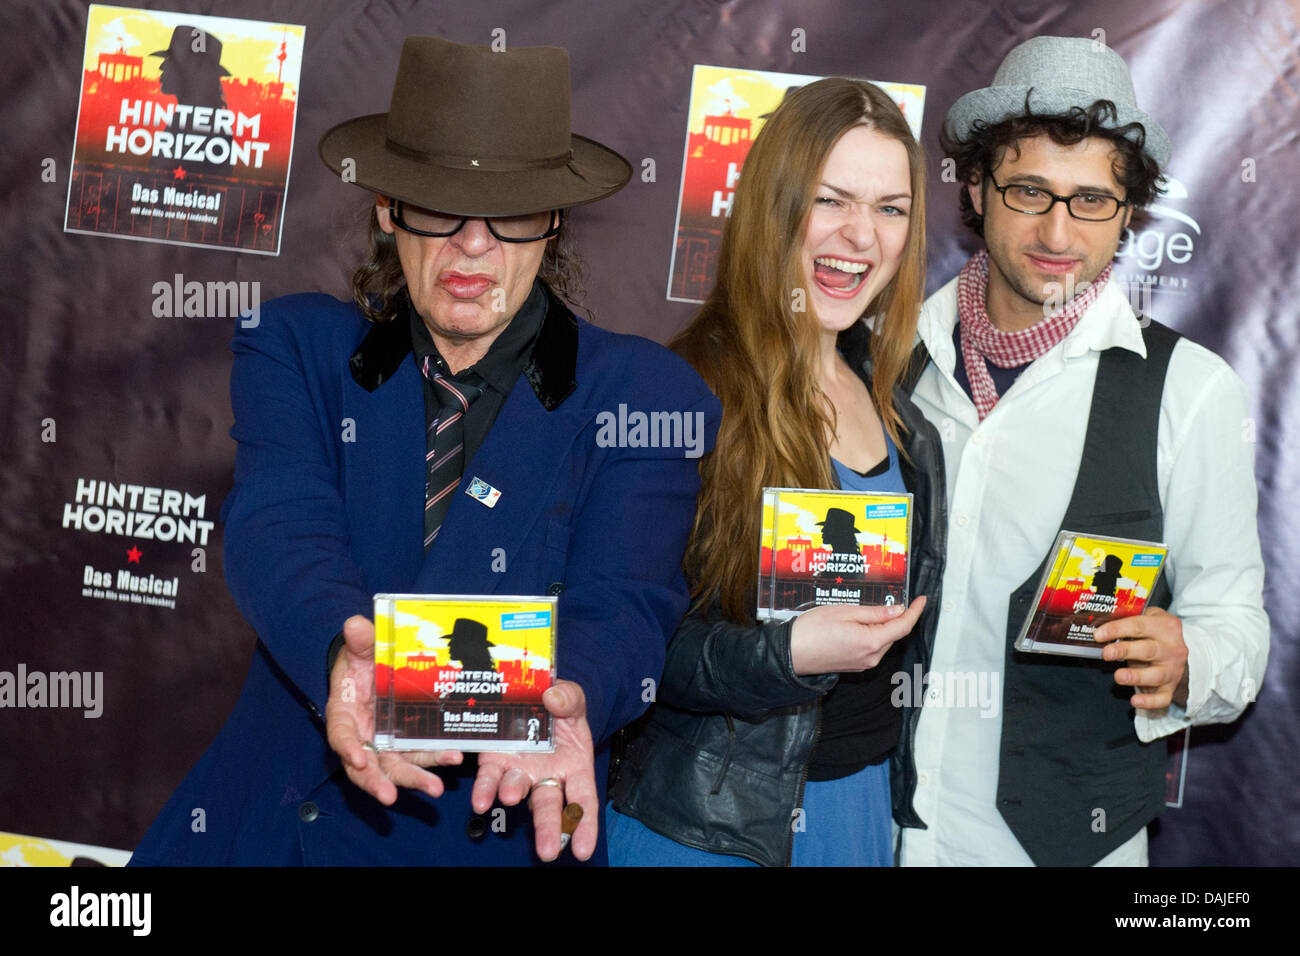 Musician Udo Lindenberg (L) along with actors from the musical "Hinterm  Horizont" (Behind the Horizon) Josephin Busch ("Jessy") and Serkan Kaya  ("Udo") introduce a CD for the musical in front of the